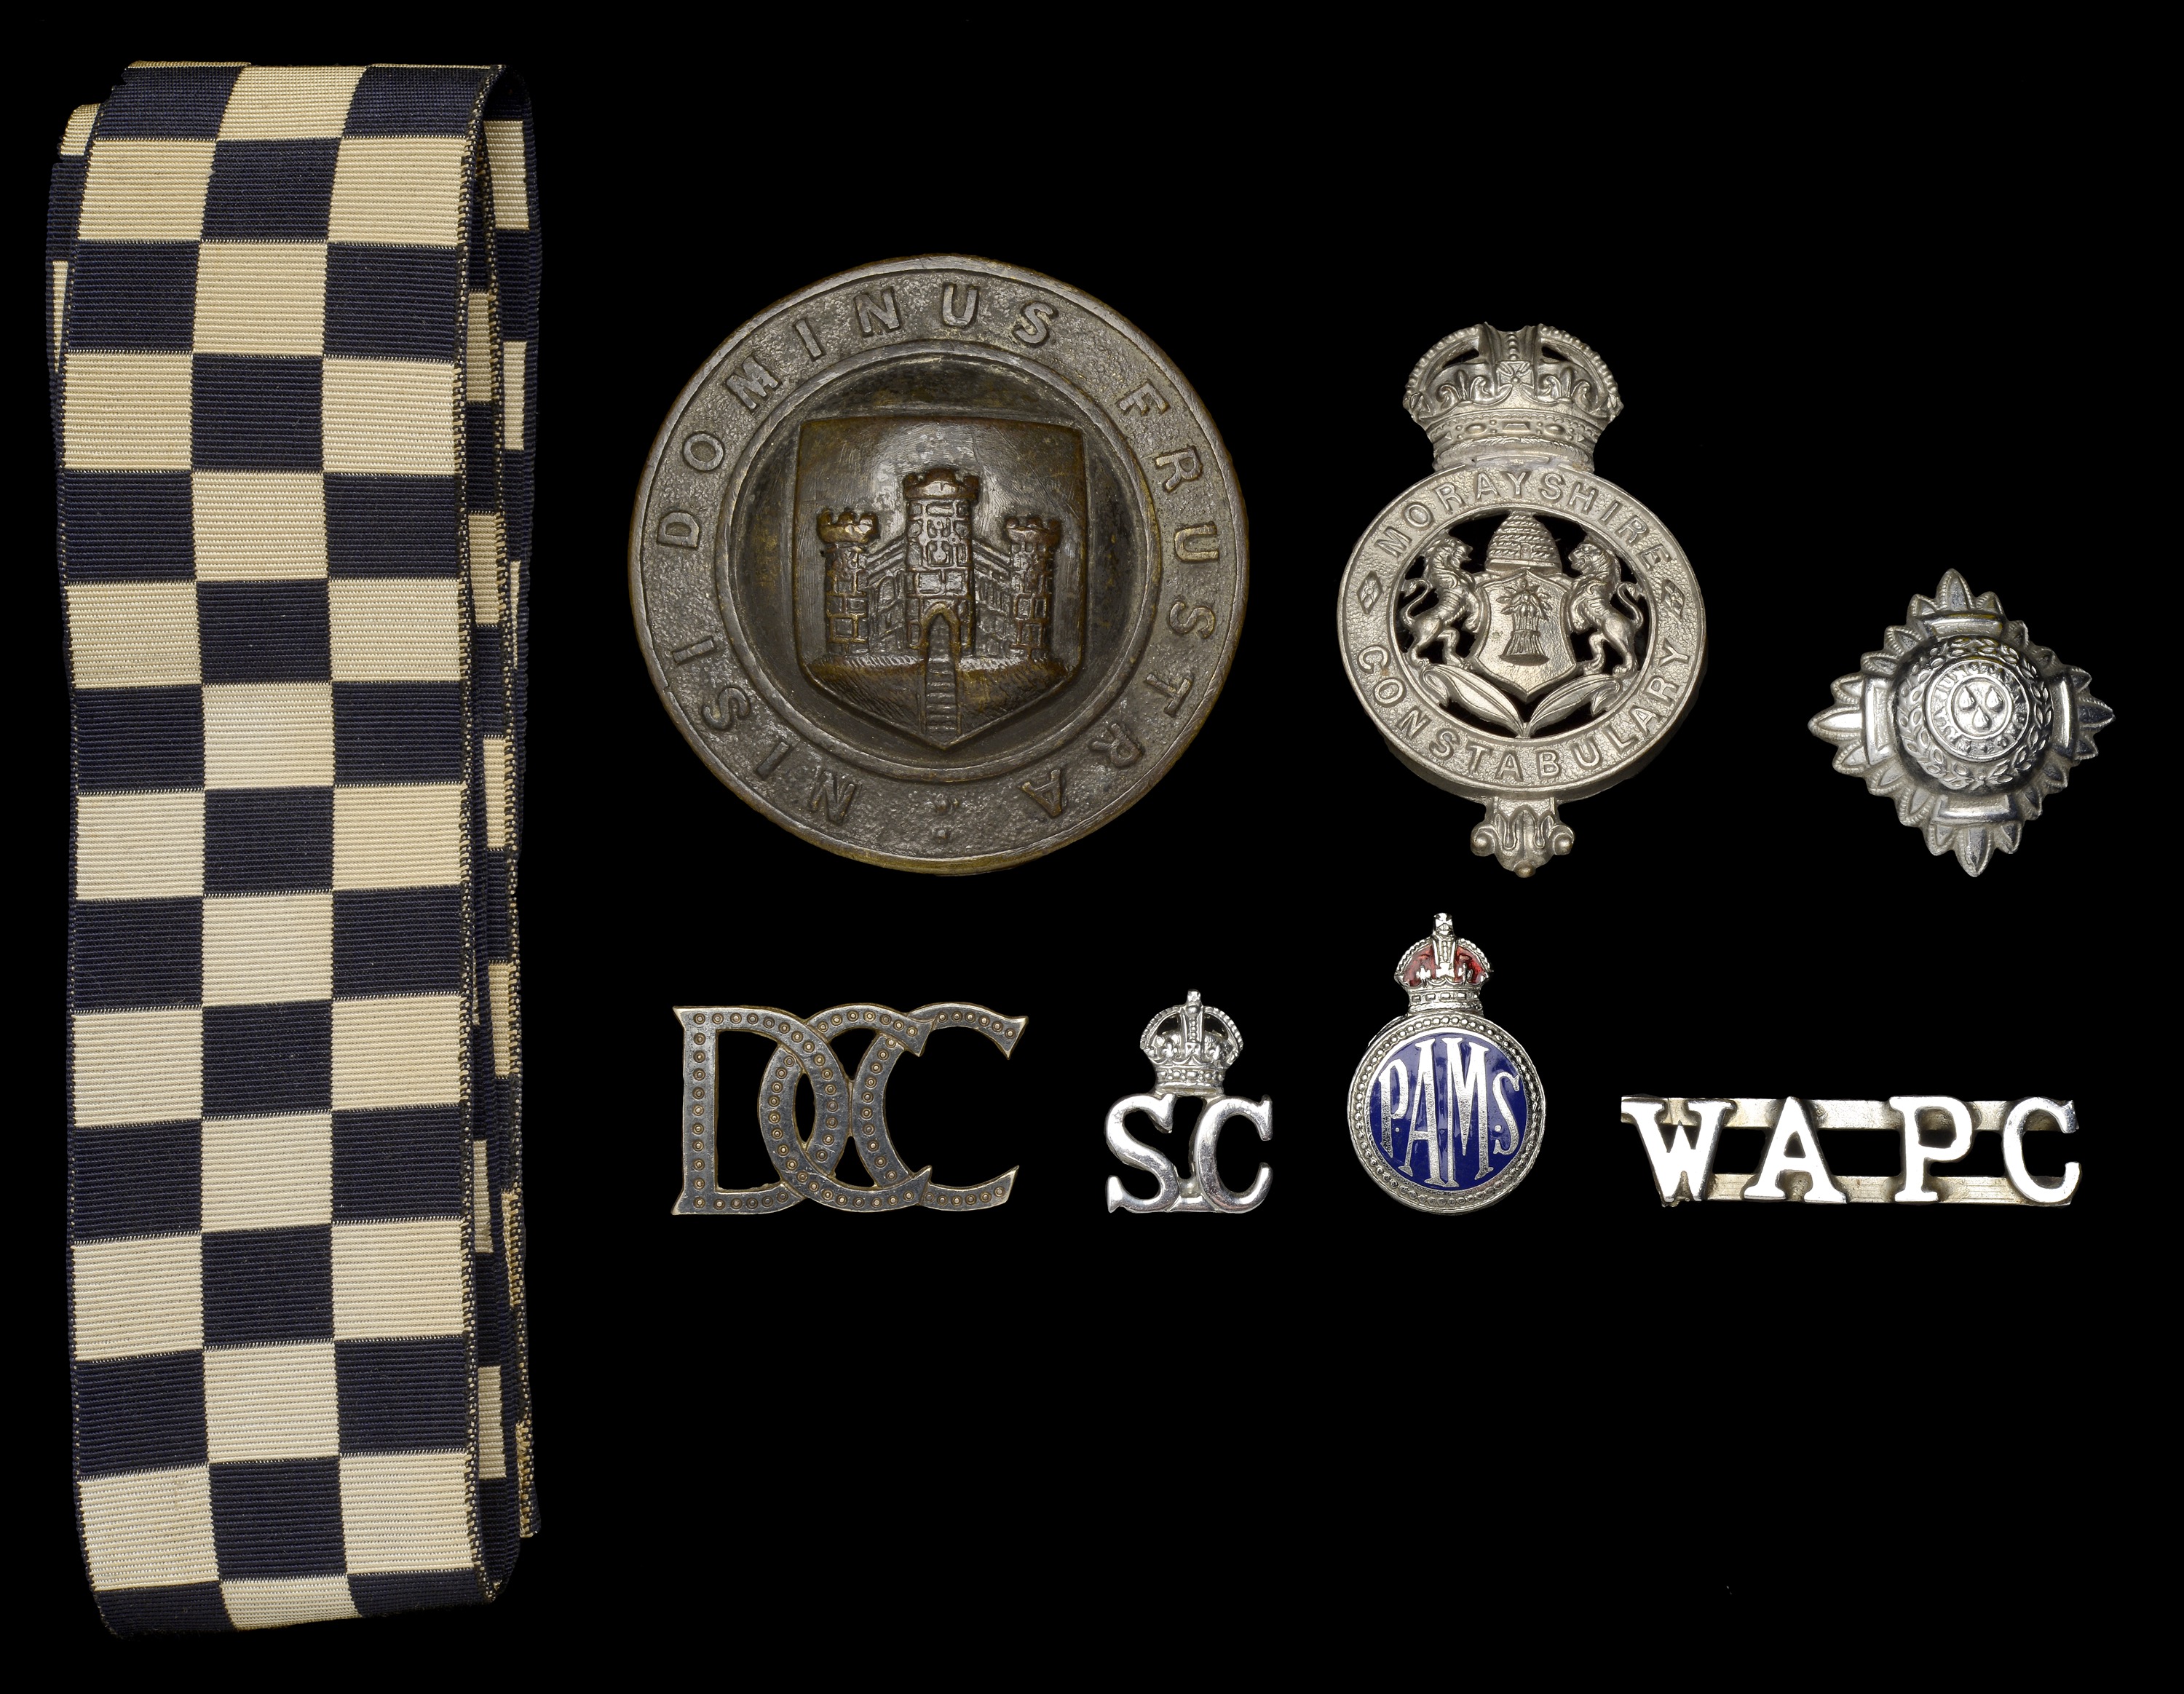 A small Collection of Scottish Police Badges